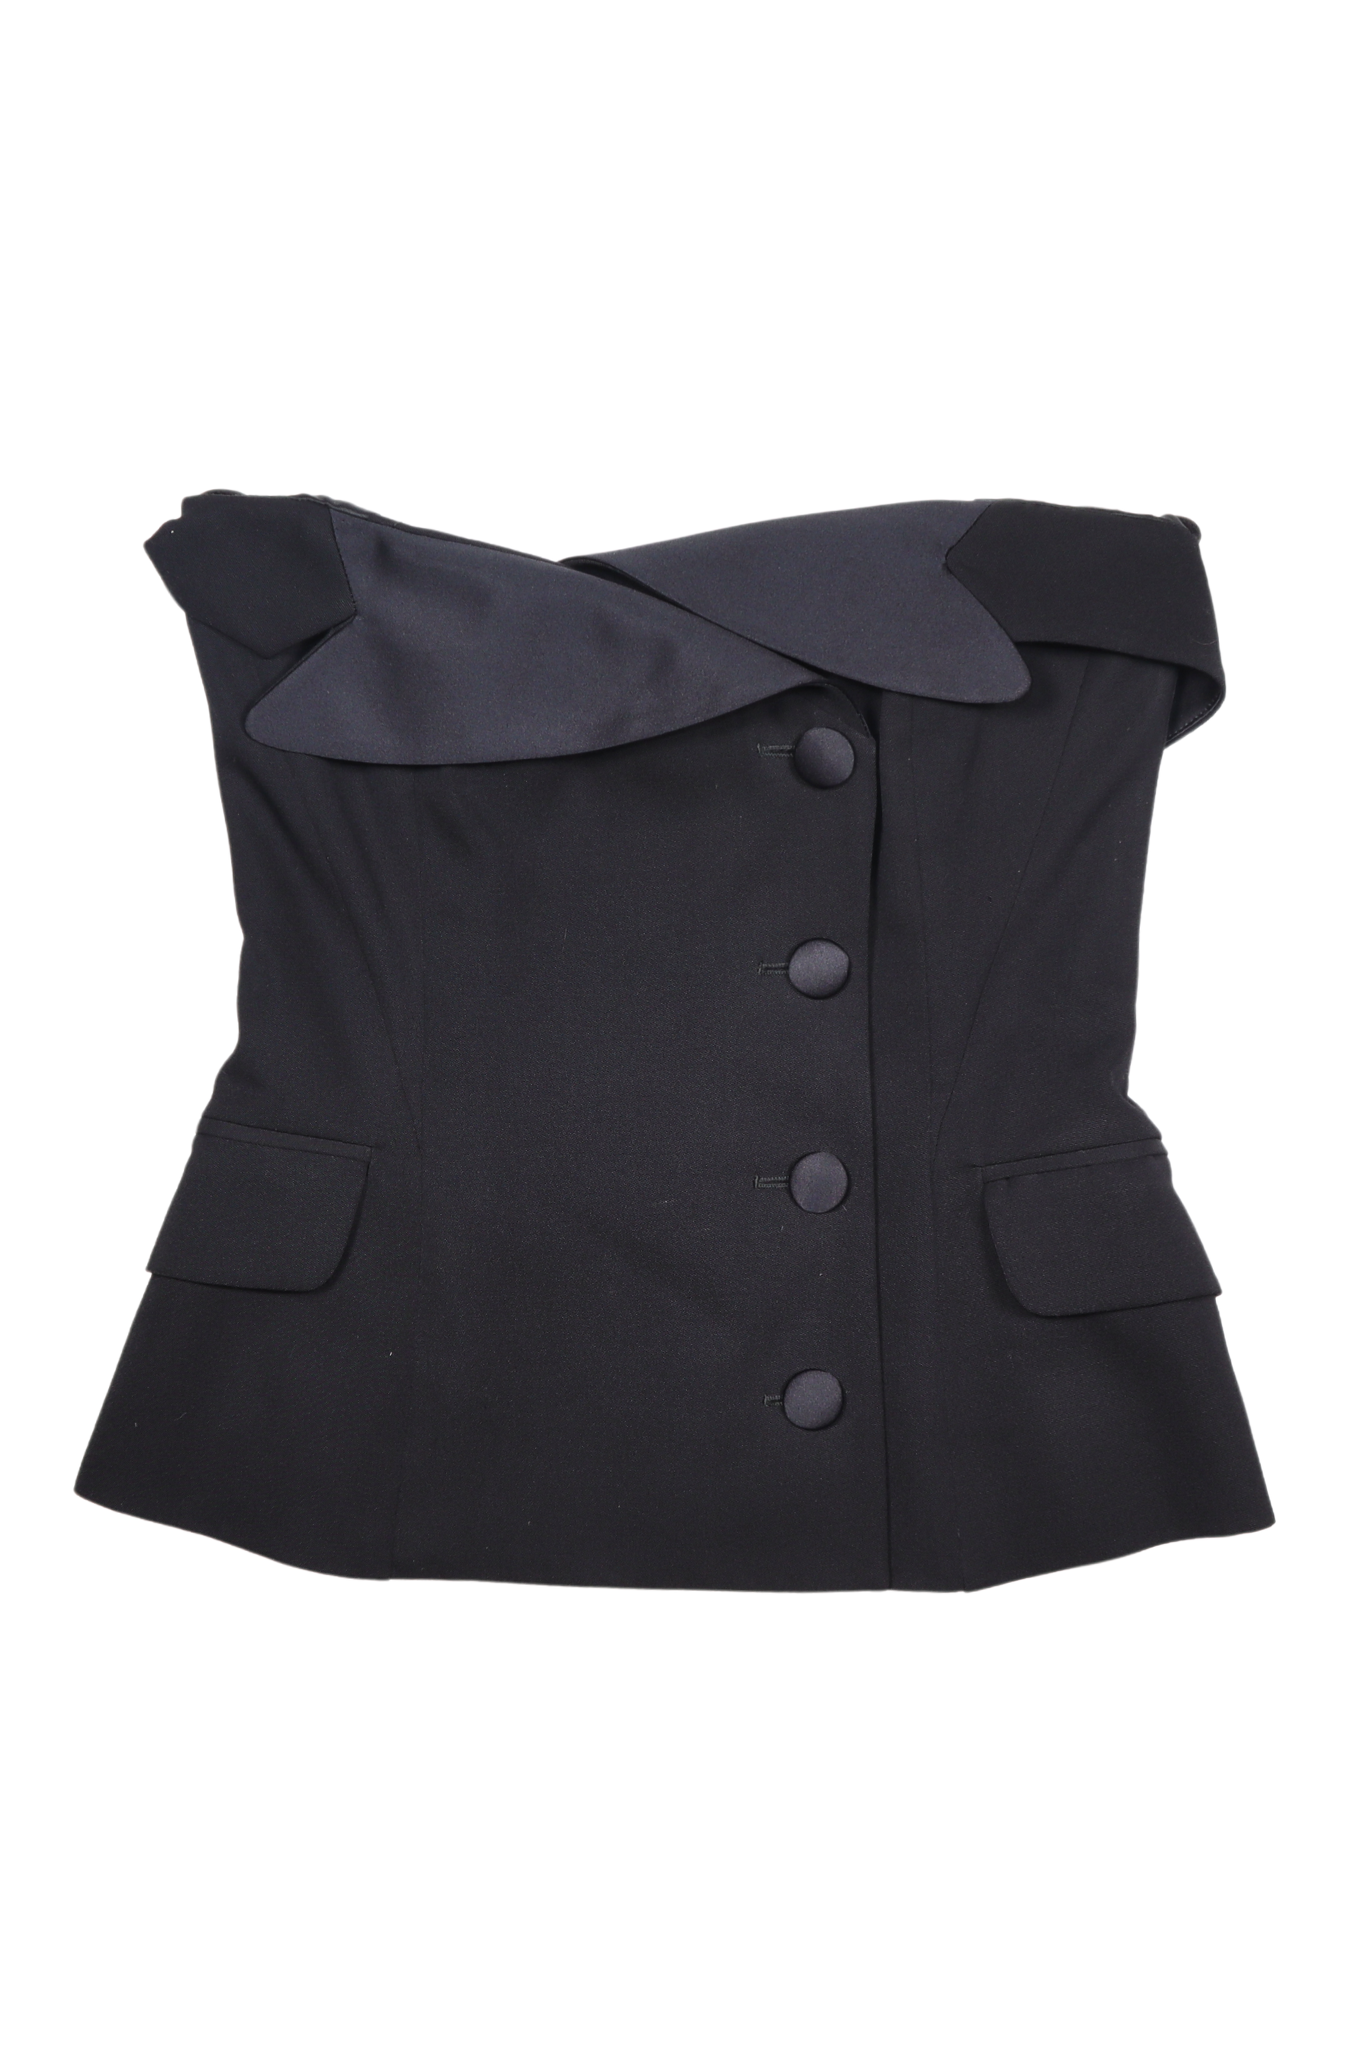 Moschino Couture Black Wool Tuxedo Bustier